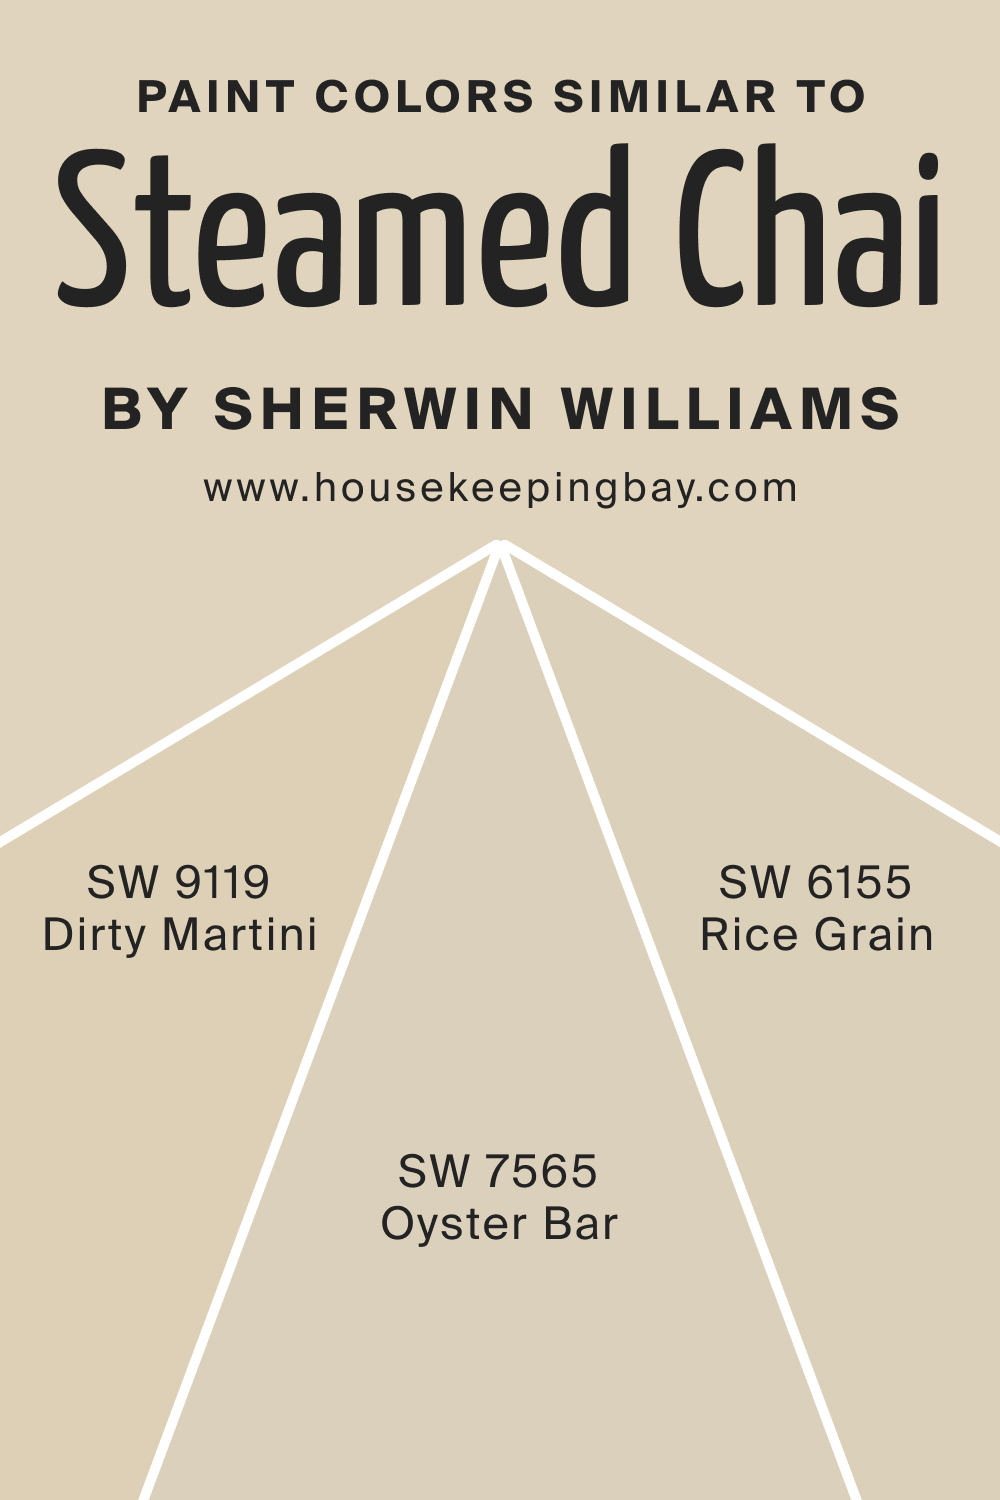 Paint Color Similar to SW 9509 Steamed Chai by Sherwin Williams